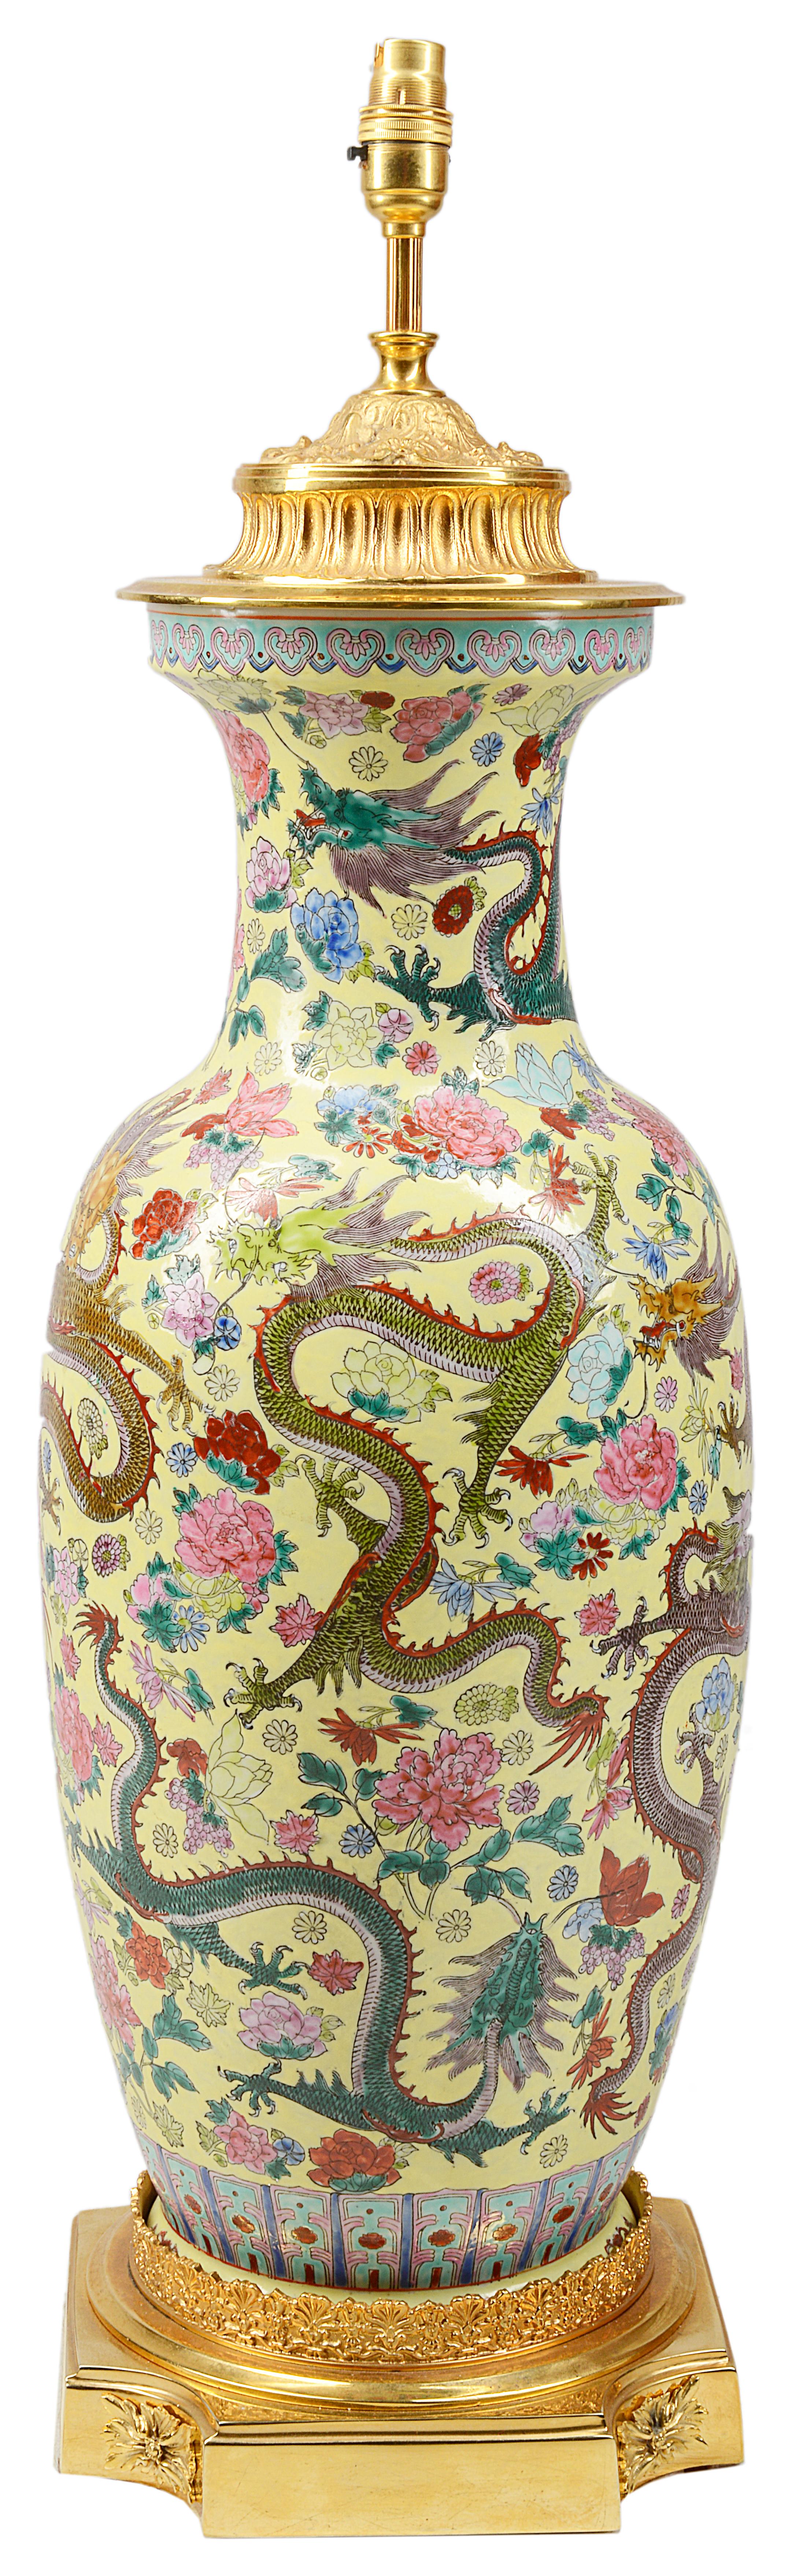 A good quality 19th century style Chinese Famille Rose porcelain vase, having mythical Dragons, flowers and foliage to the yellow ground. Mounted on gilded ormolu base and top.